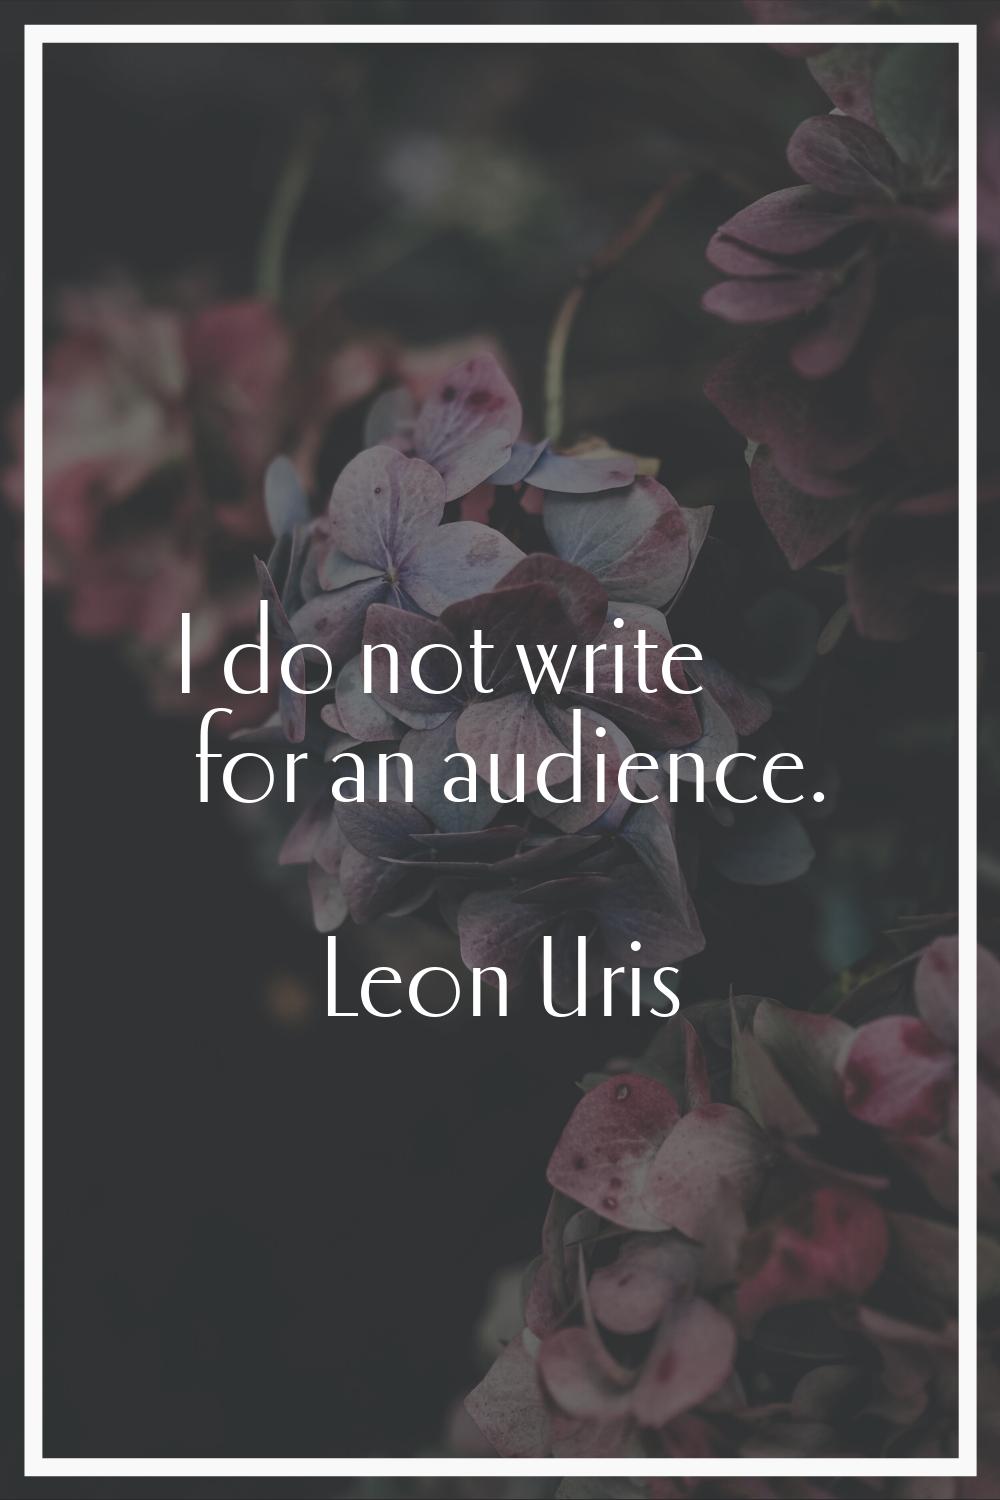 I do not write for an audience.